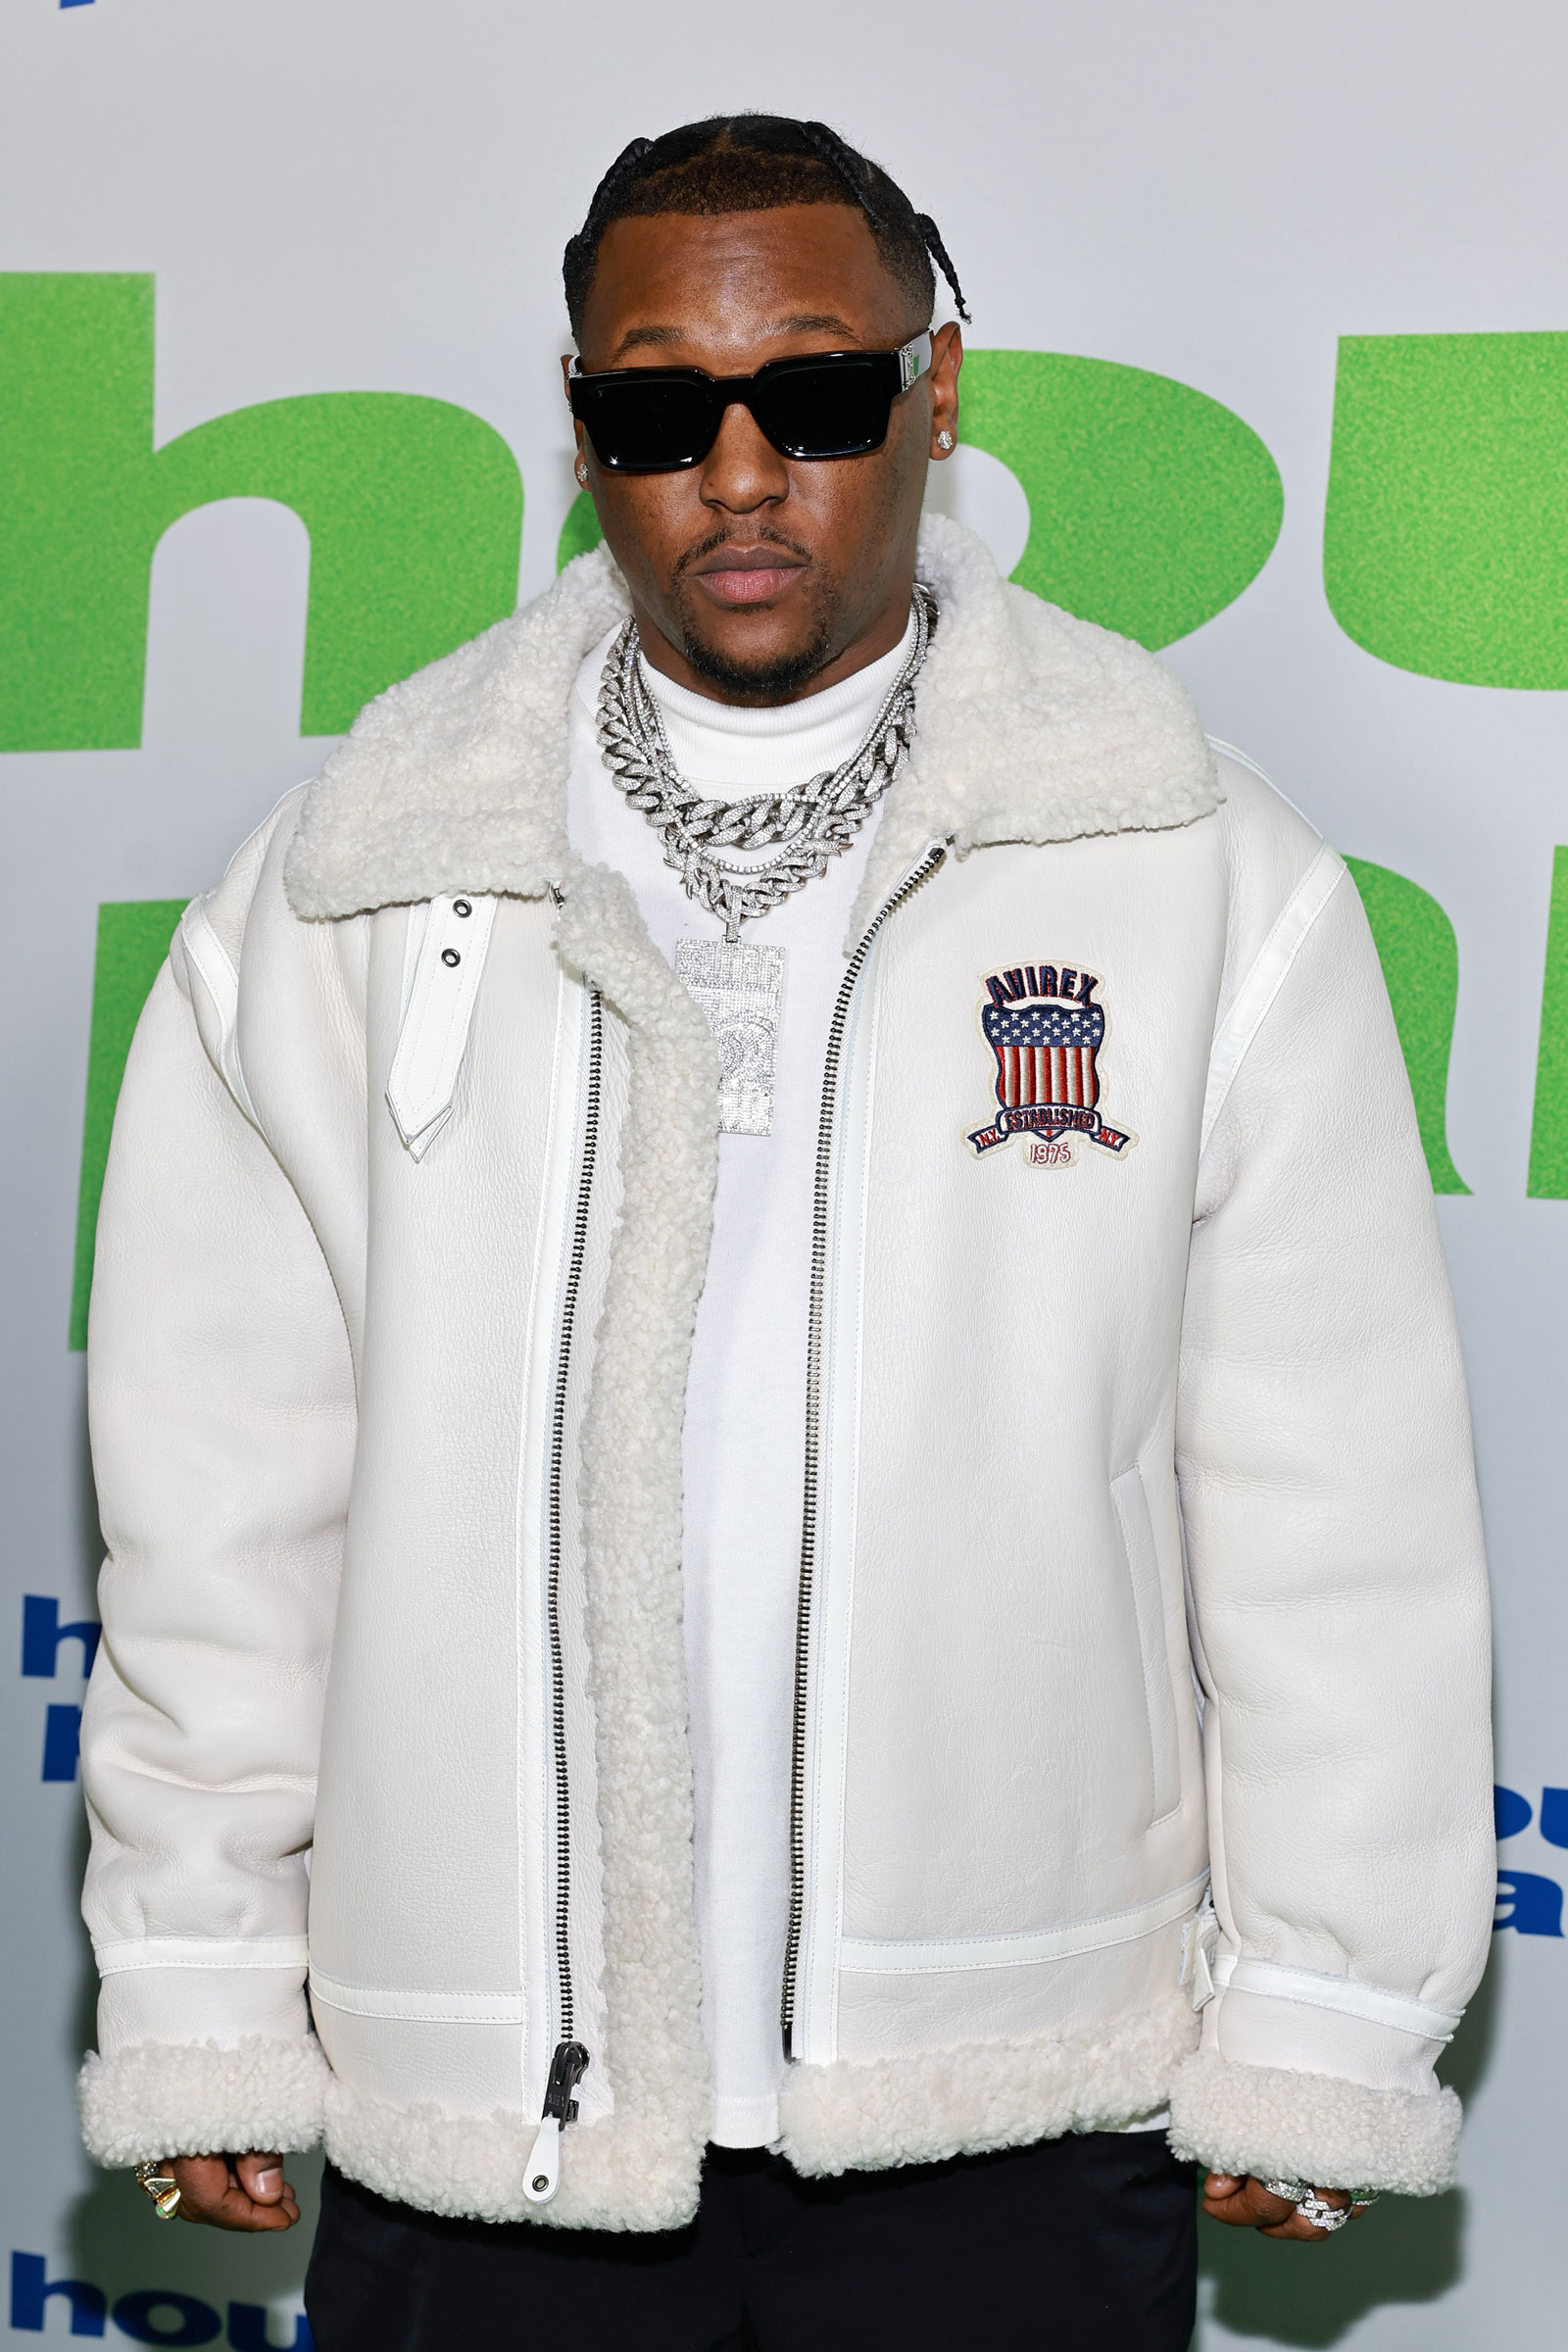 Hit-Boy attends the Special Red Carpet Screening for New Line Cinema’s “House Party” at TCL Chinese 6 Theatres in Hollywood, Calif. on Jan. 11, 2023.